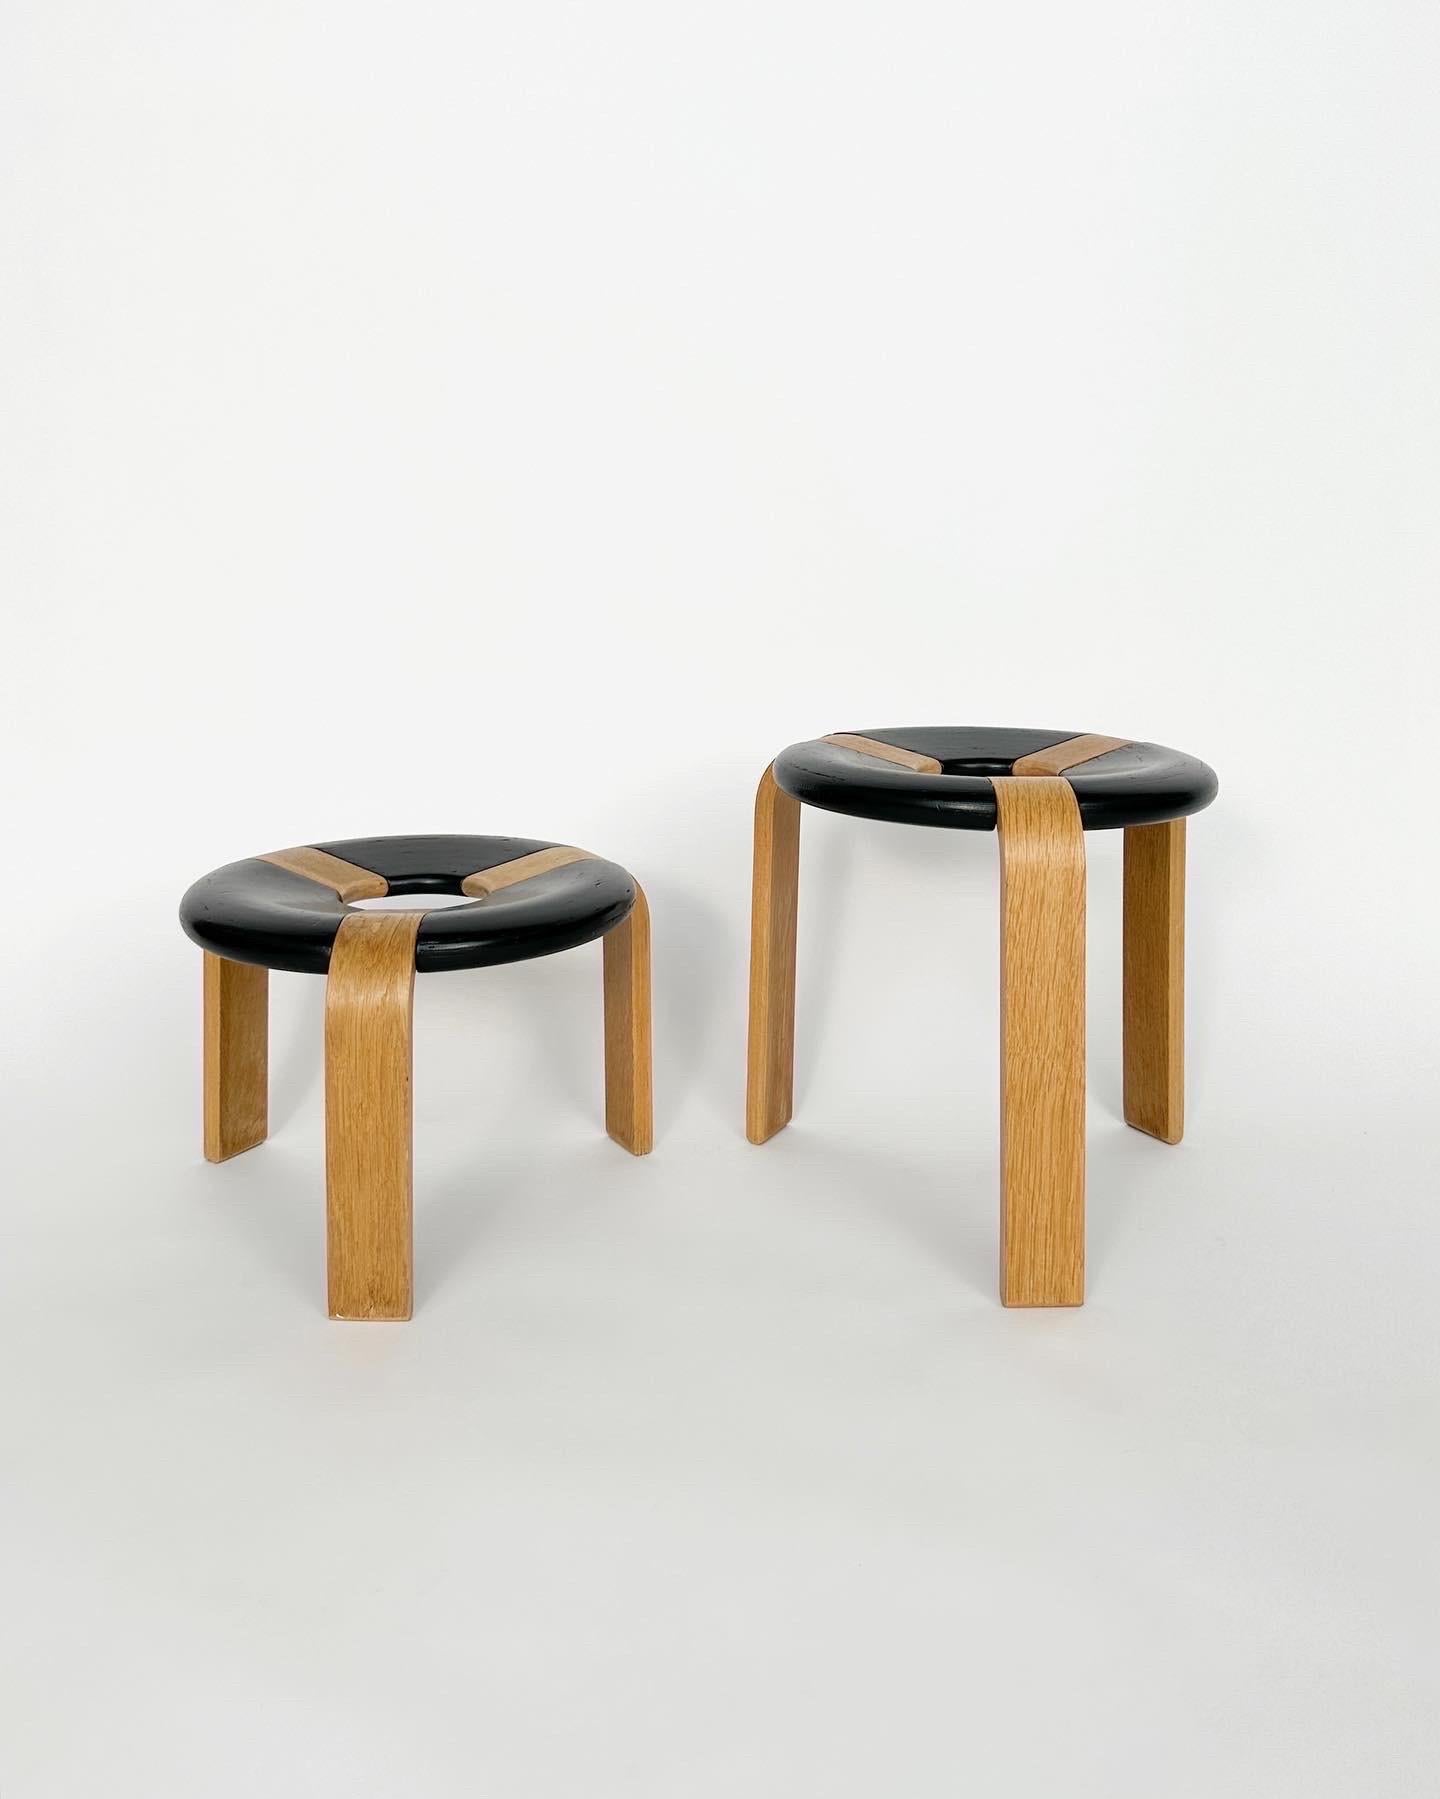 Donut stool designed by Rud Thygesen & Johnny Sørensen in 1974, model No. 4550, produced by Magnus Olesen in Denmark.

This pair comes in the favorable version in oak and black stained wood.

Both in great condition with only minor signs of